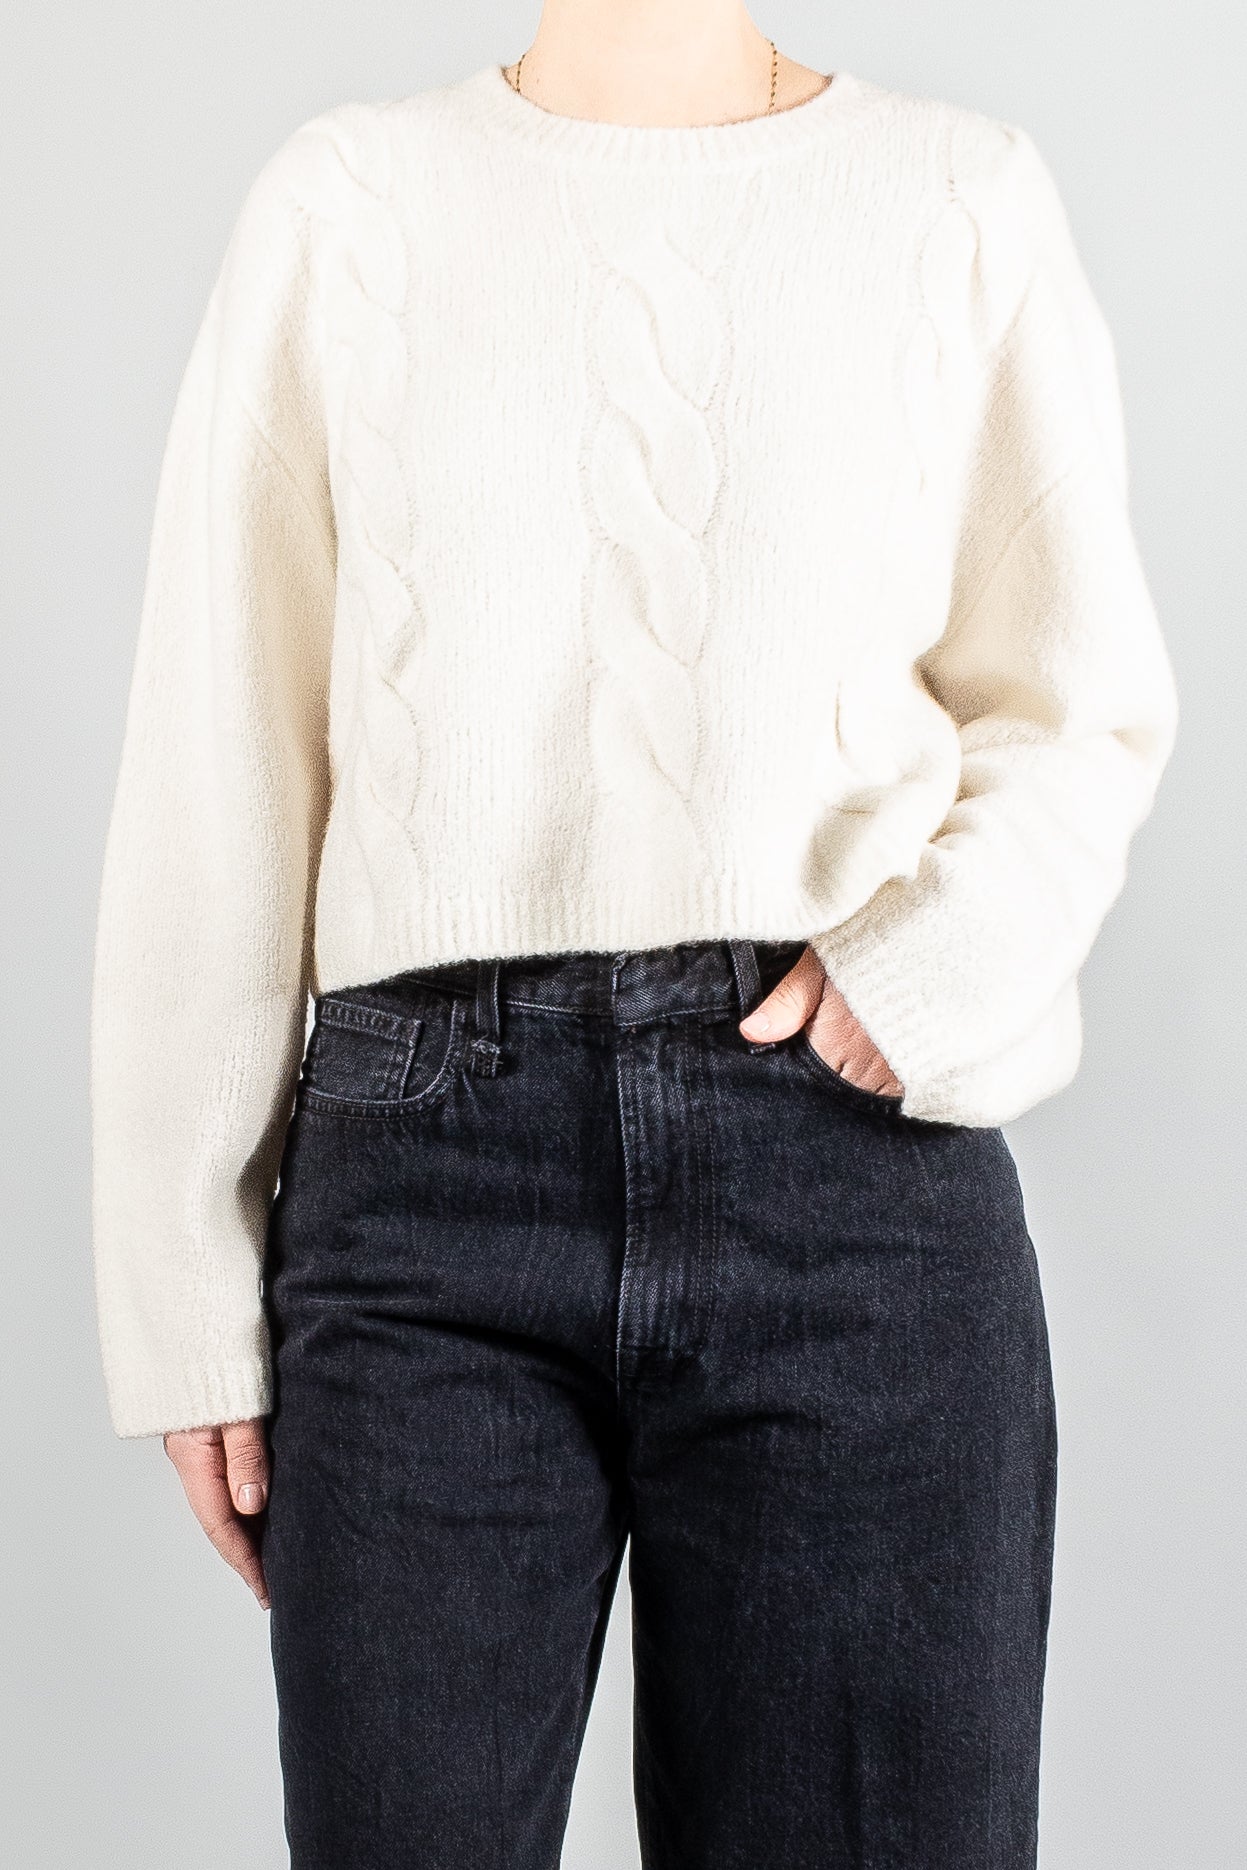 Lisa Yang Hannah Sweater-Knitwear-Misch-Boutique-Vancouver-Canada-misch.ca